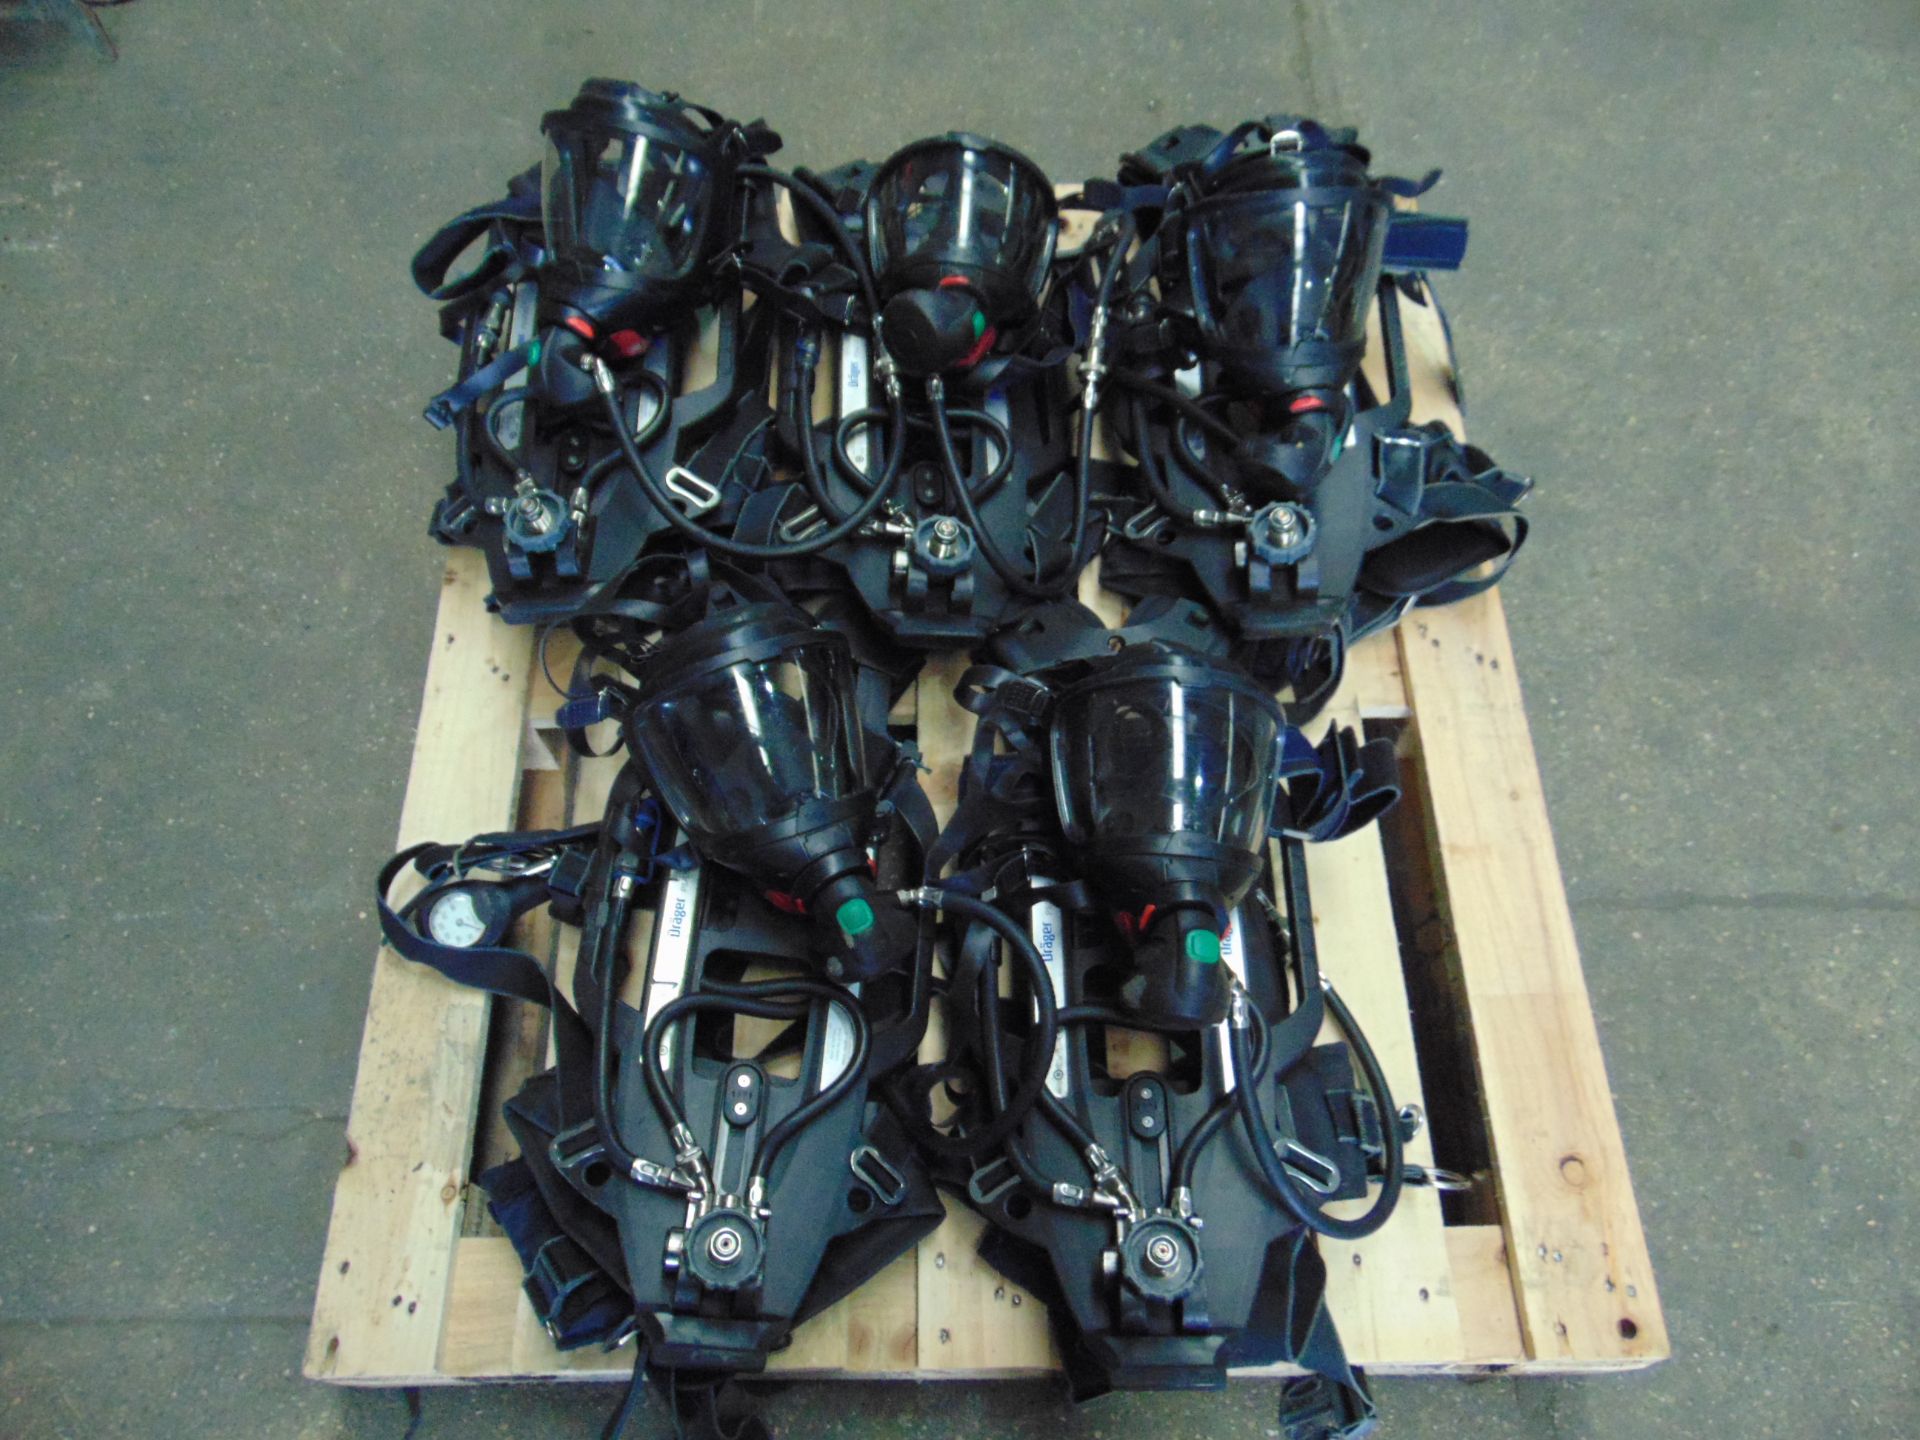 5 x Drager PSS 7000 Self Contained Breathing Apparatus w/ 10 x Drager 300 Bar Air Cylinders - Bild 7 aus 21